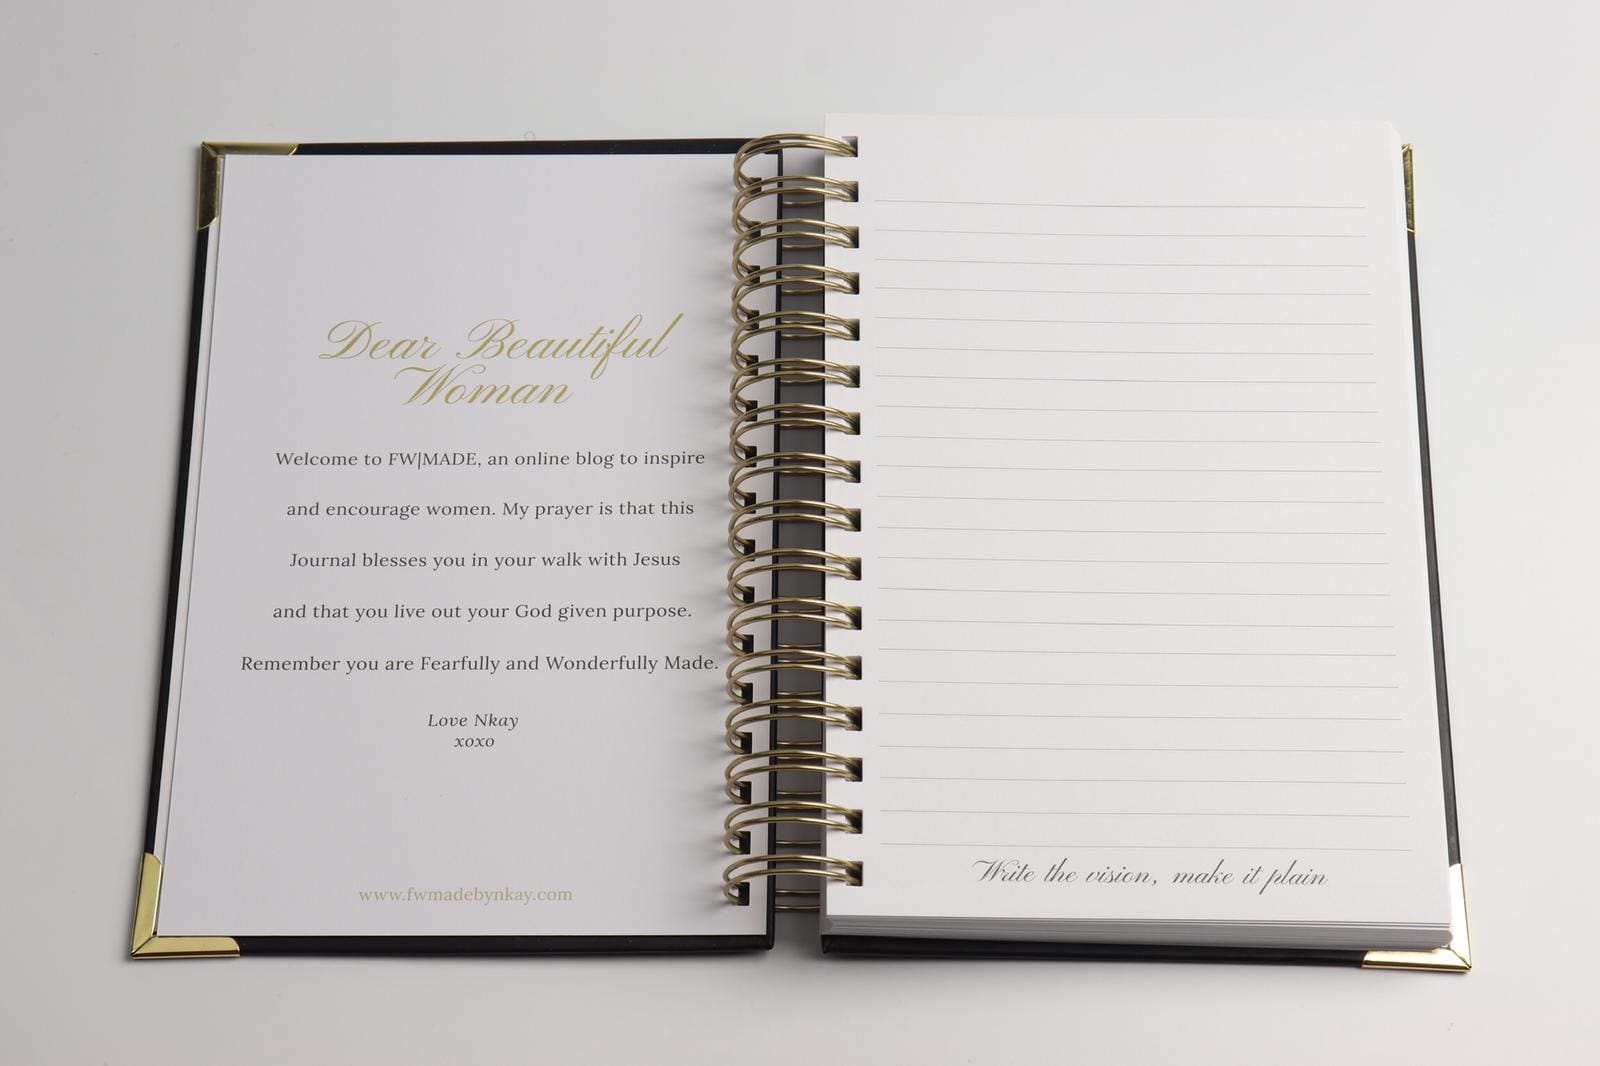 WRITE THE VISION BLACK AND GOLD JOURNAL